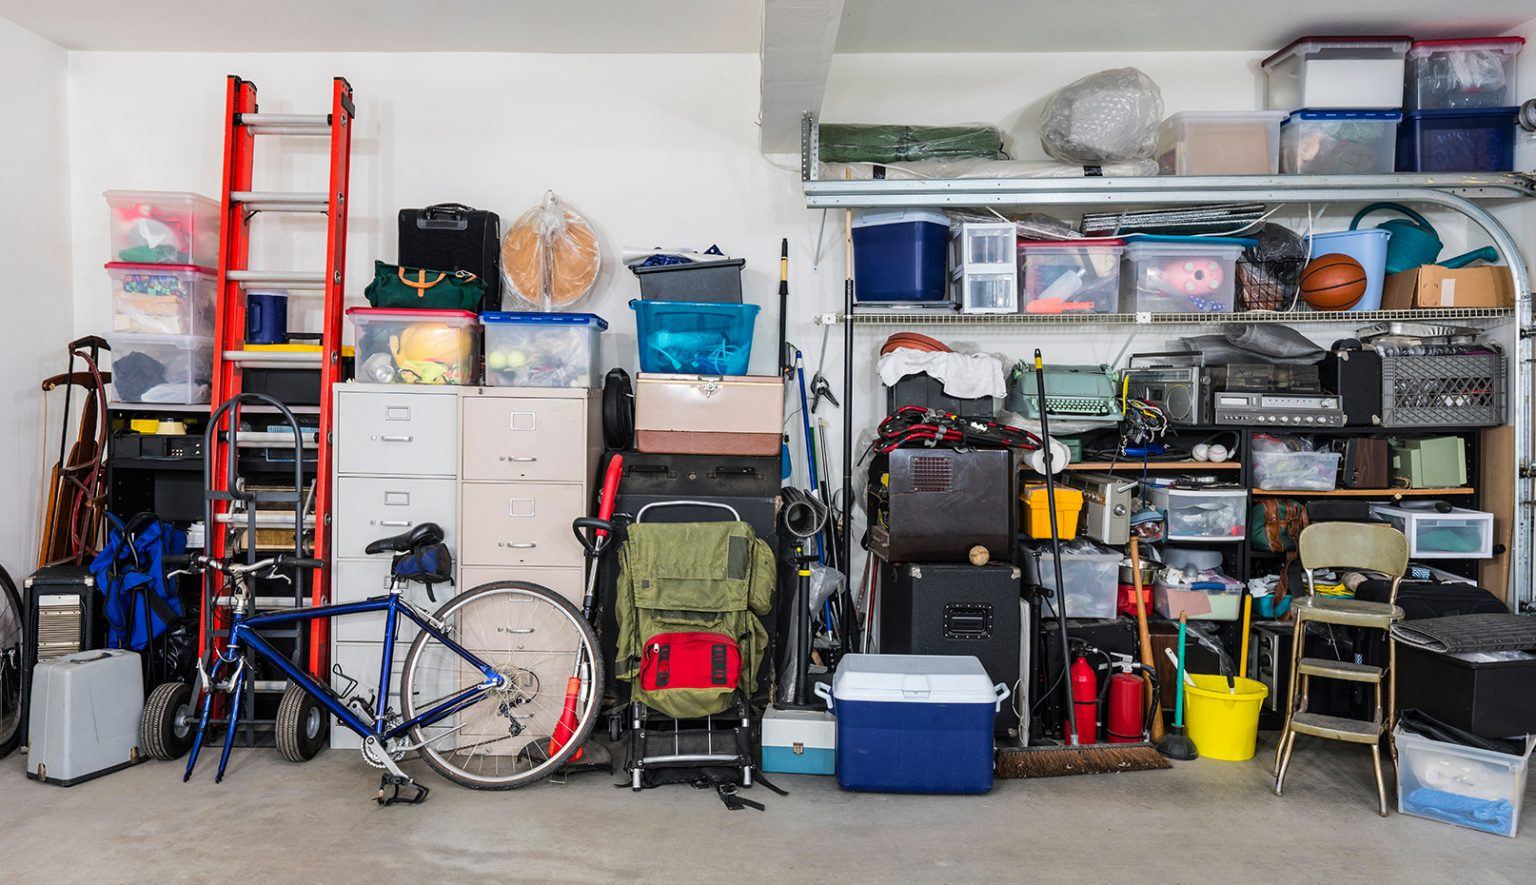 Confinement Cleaning Time: How to Fall in Love with Your Garage